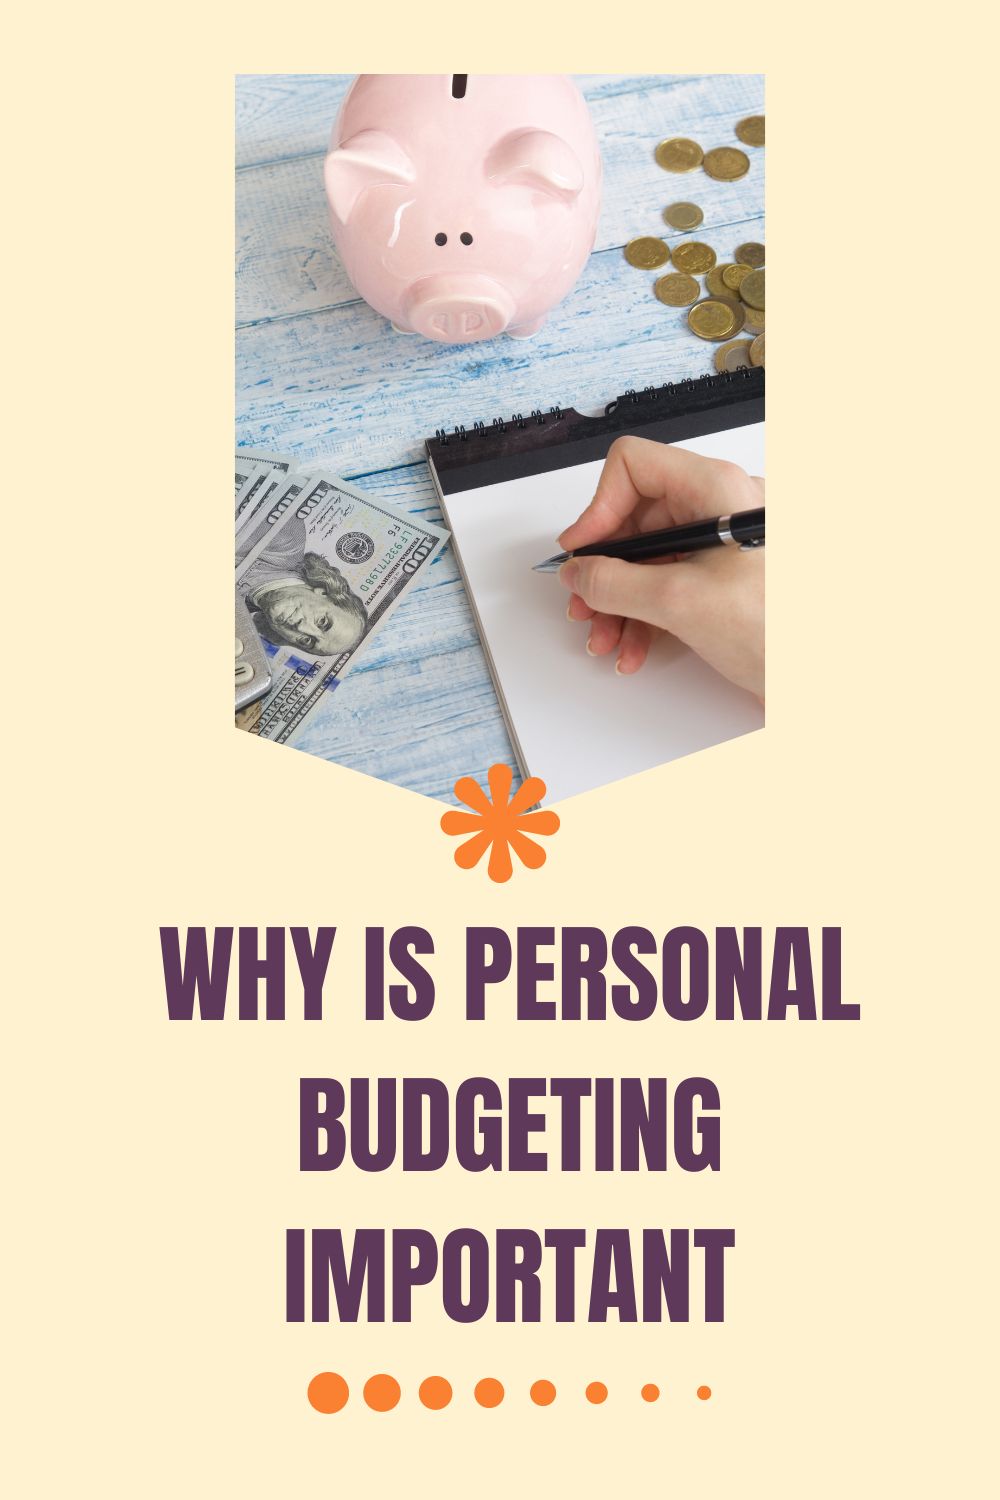 Why is Personal Budgeting Important